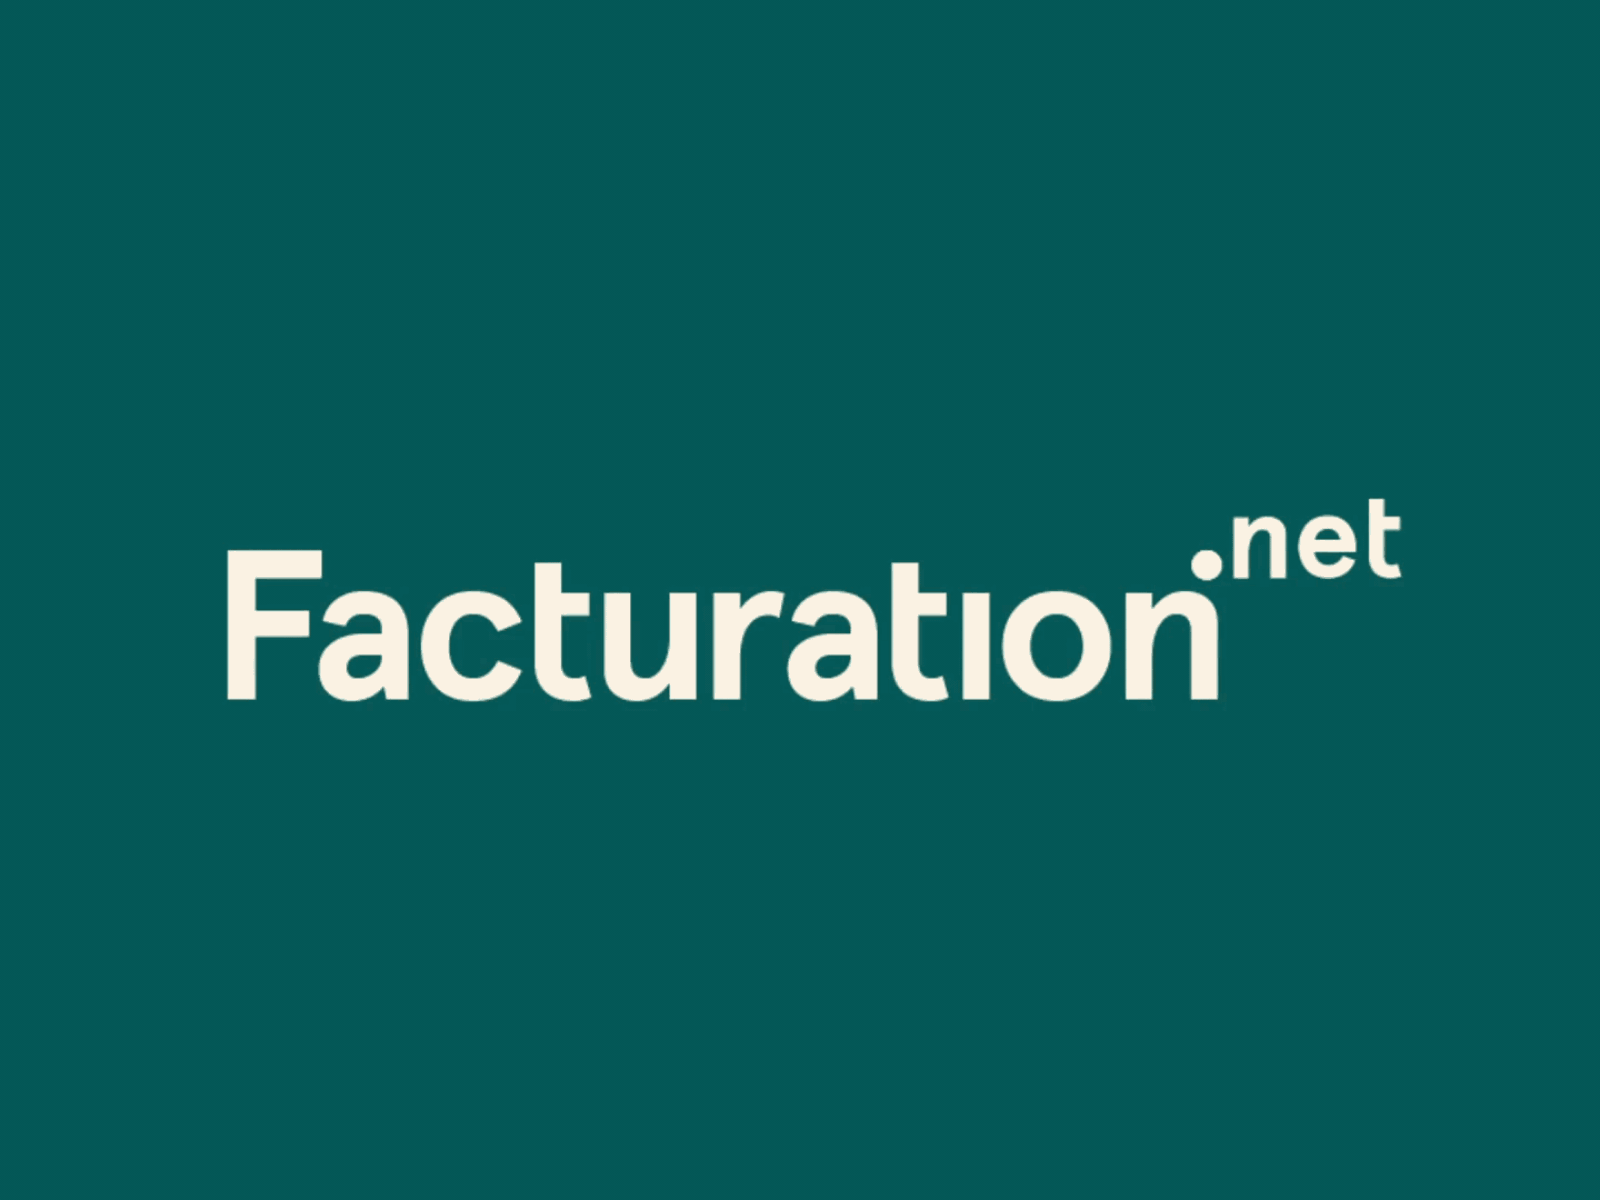 Logo Animation for Facturation.net aftereffects animation branding design graphicdesign graphicdesigner intro logo logoanimation logodesign logodesigner logodesigns logoinspiration logoinspirations logointro logomaker logomark logos motiondesign motiongraphics